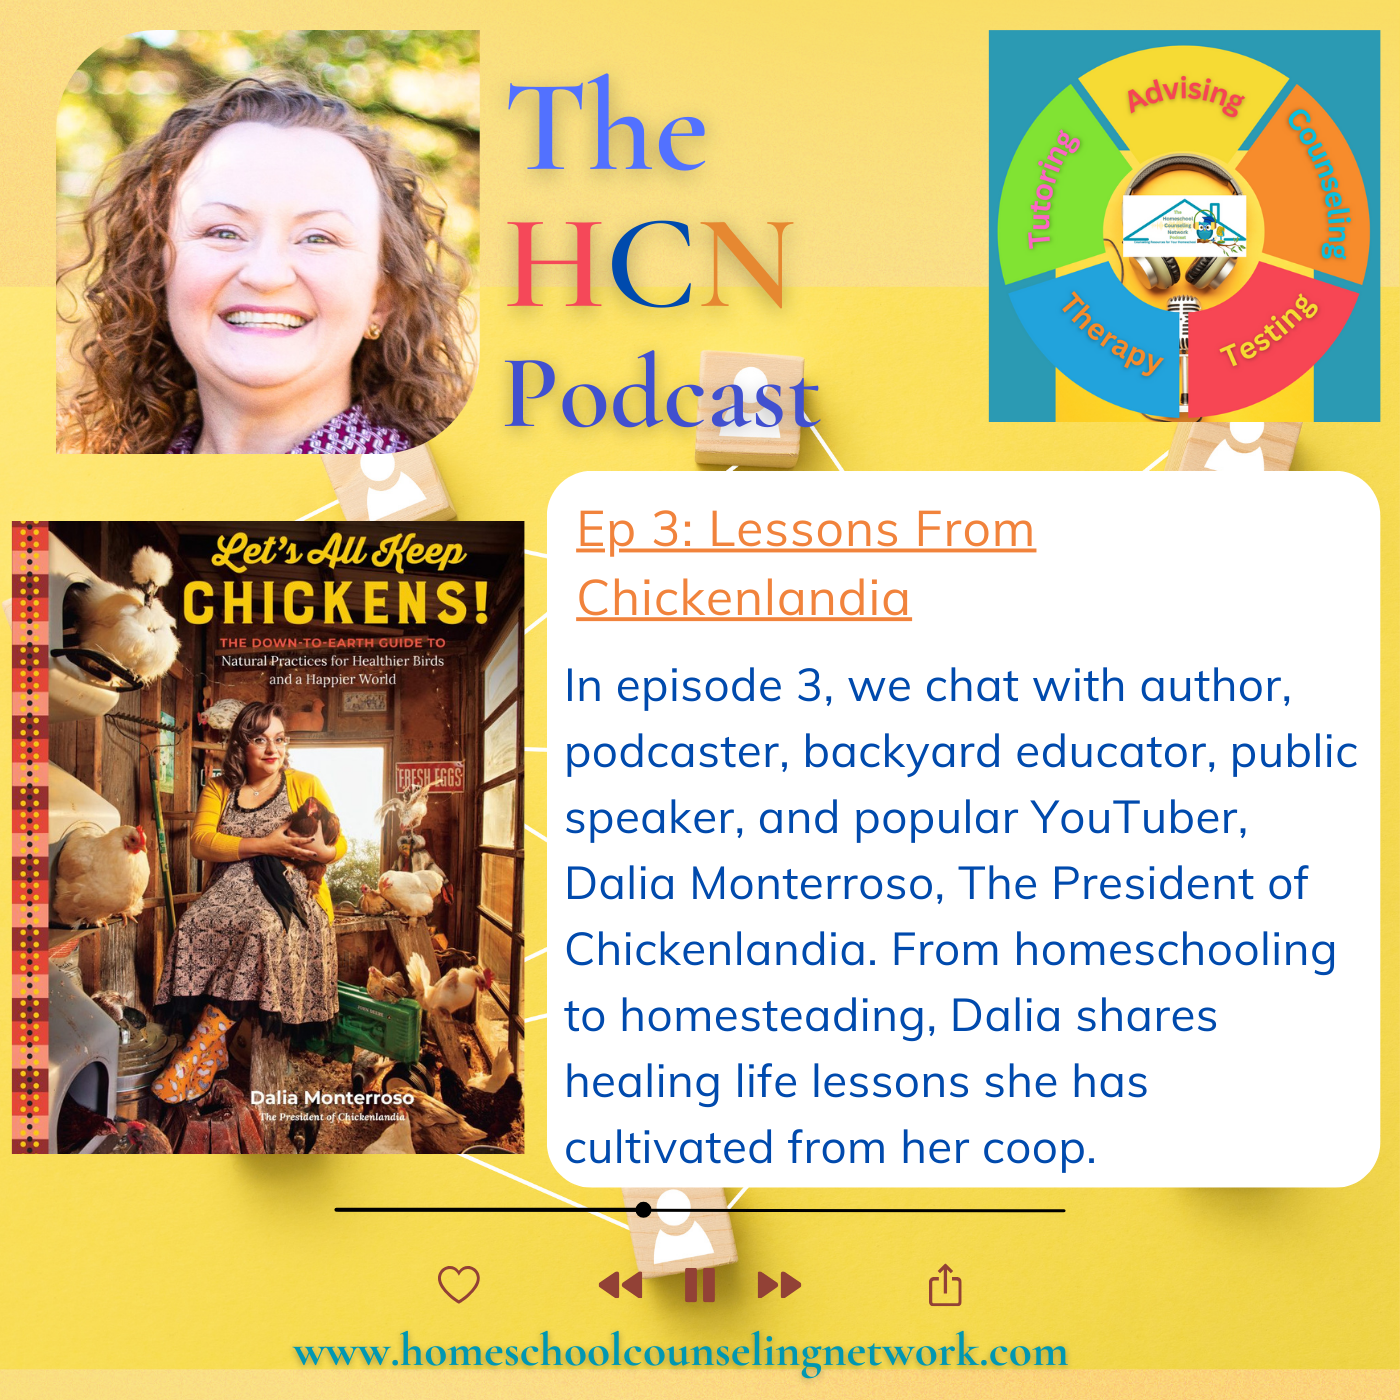 The HCN Podcast – Episode 3: Lessons From Chickenlandia